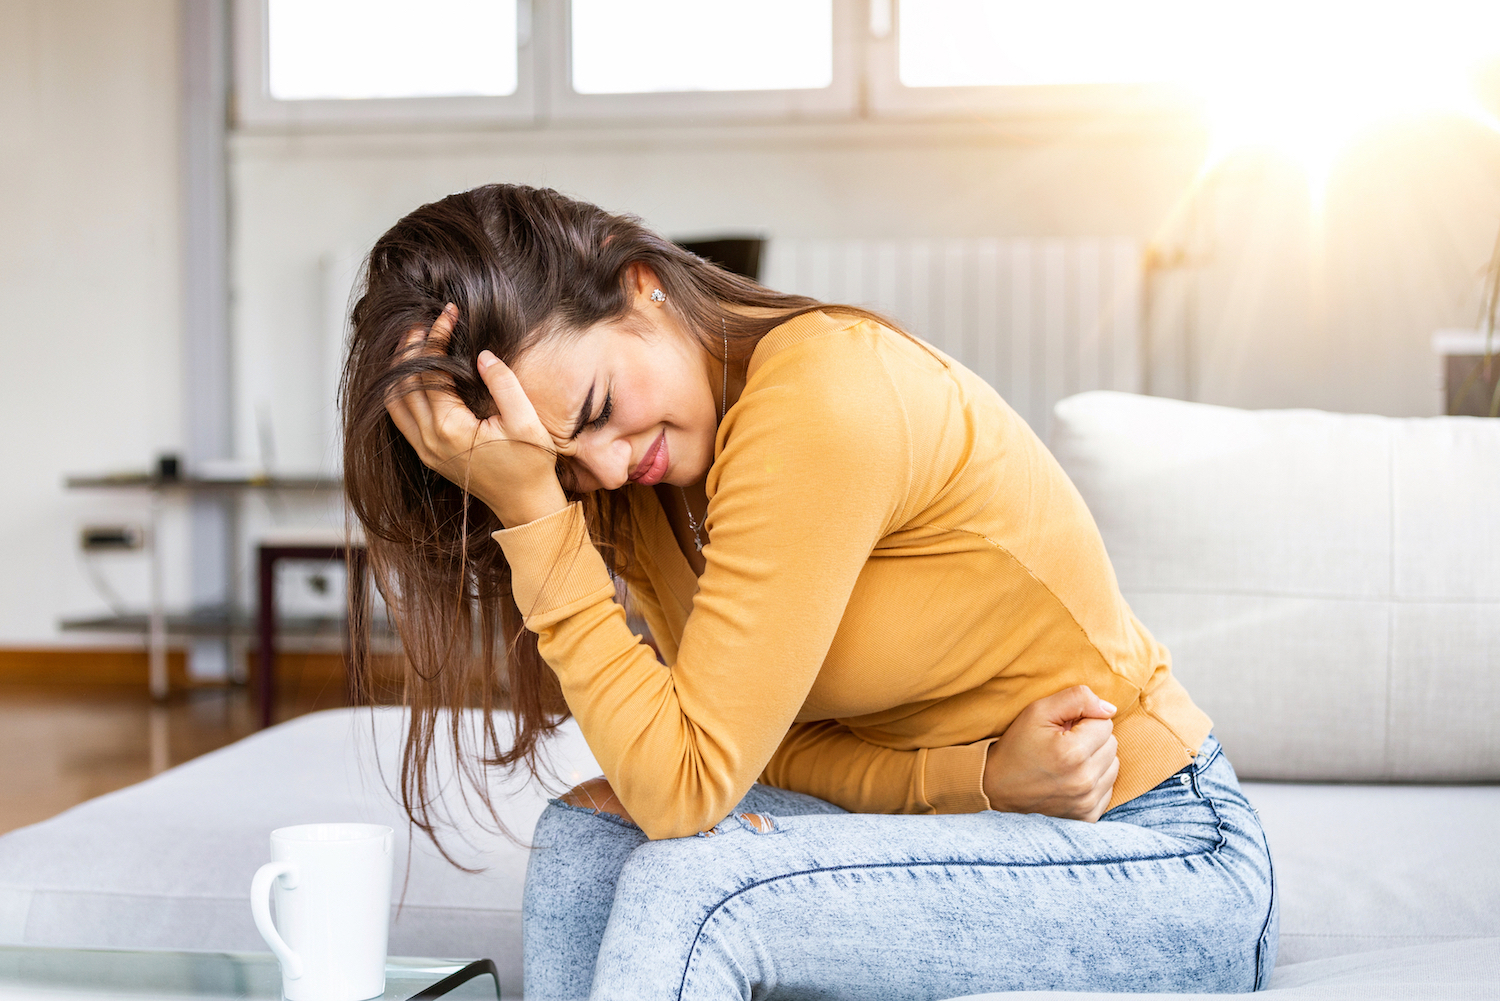 What are the Symptoms of Stomach Ulcer and the Treatment for Stomach Ulcer?